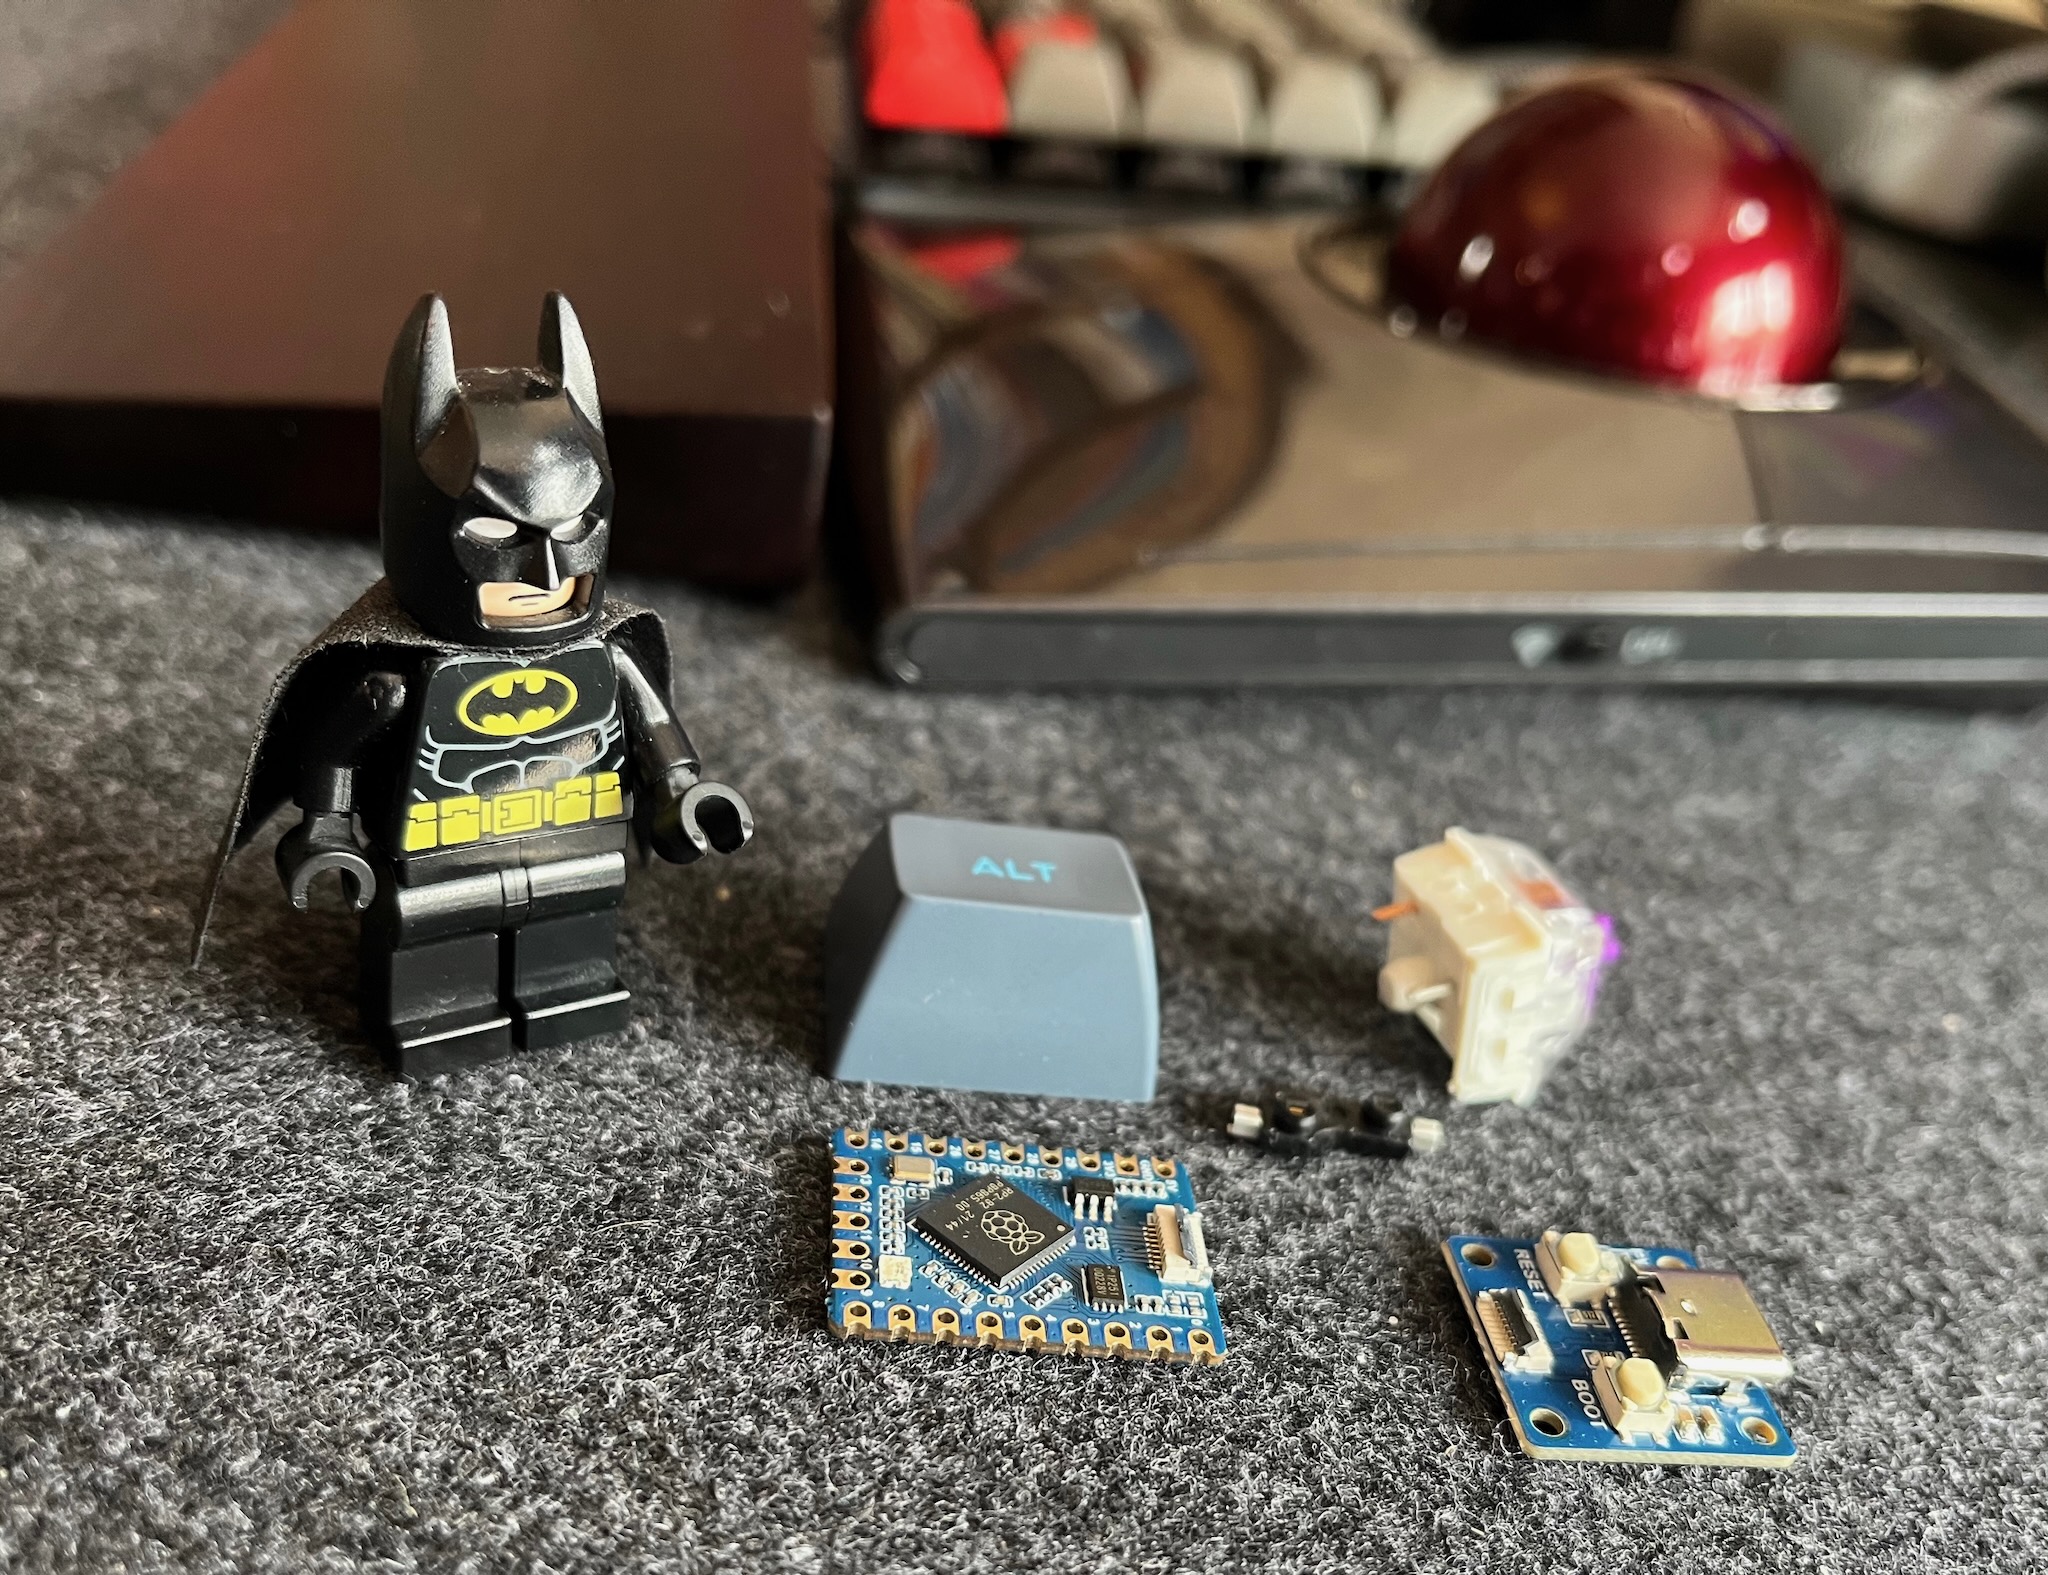 a picture of the waveshare rp2040-tiny microcontroller and usb boards, a kailh hotswap socket, a key switch, a blue alt keycap, and a batman lego minifigure for scale (this is the article's hero image)